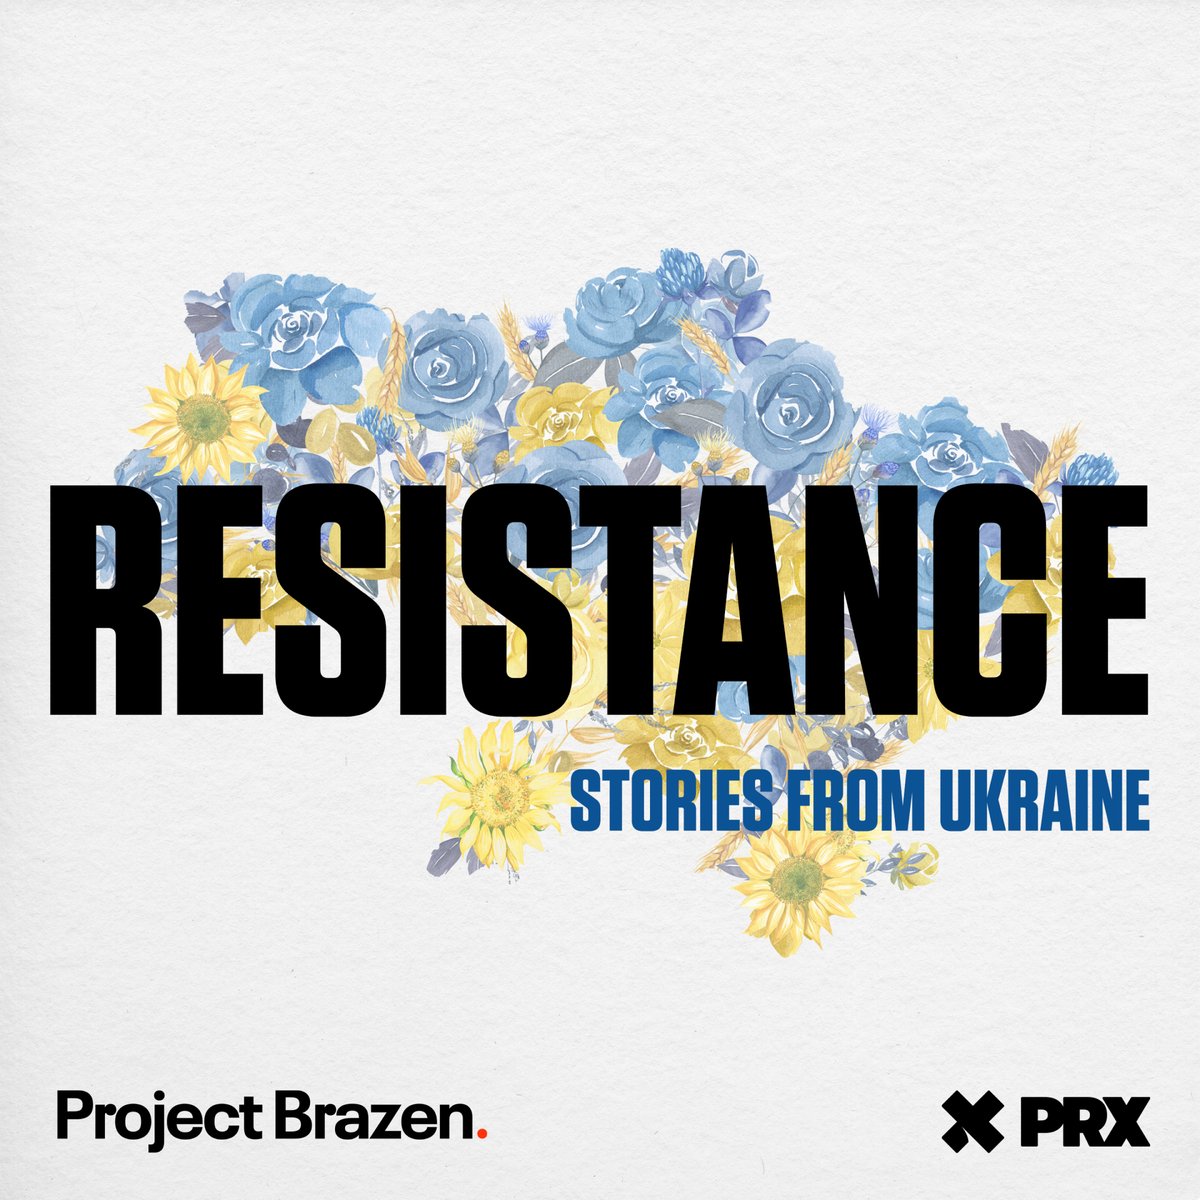 The podcast is amazing and next week there's also a Resistance documentary from @laurelchor &amp; @iamarman88 that will blow you away, as well. Subscribe: https://t.co/Or5TjL1csN https://t.co/lCUkdPqkHh